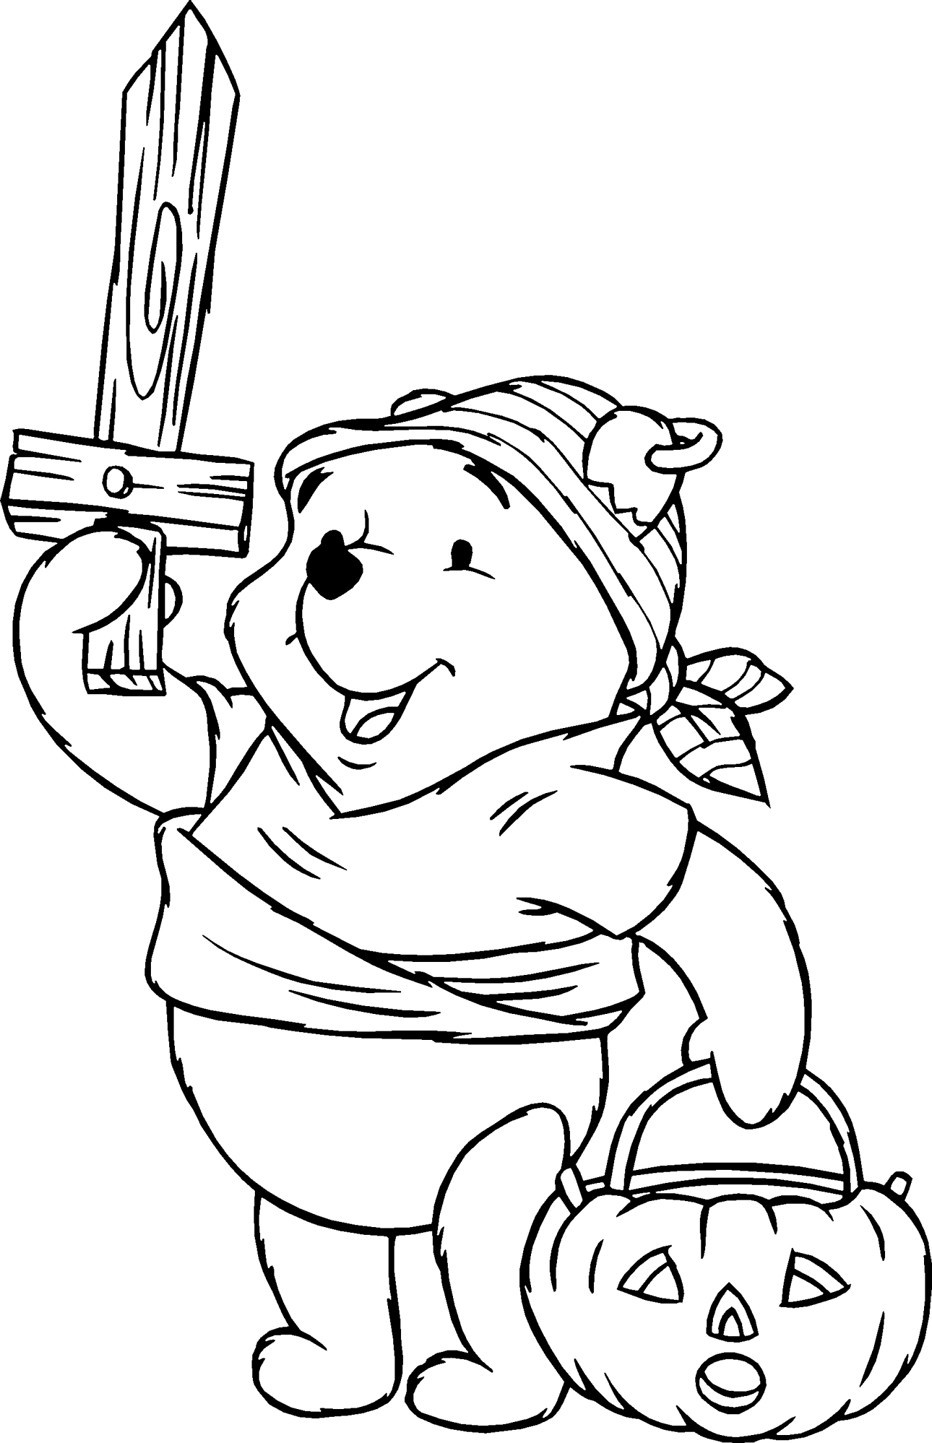 Printable Coloring Pages For Kids
 24 Free Printable Halloween Coloring Pages for Kids